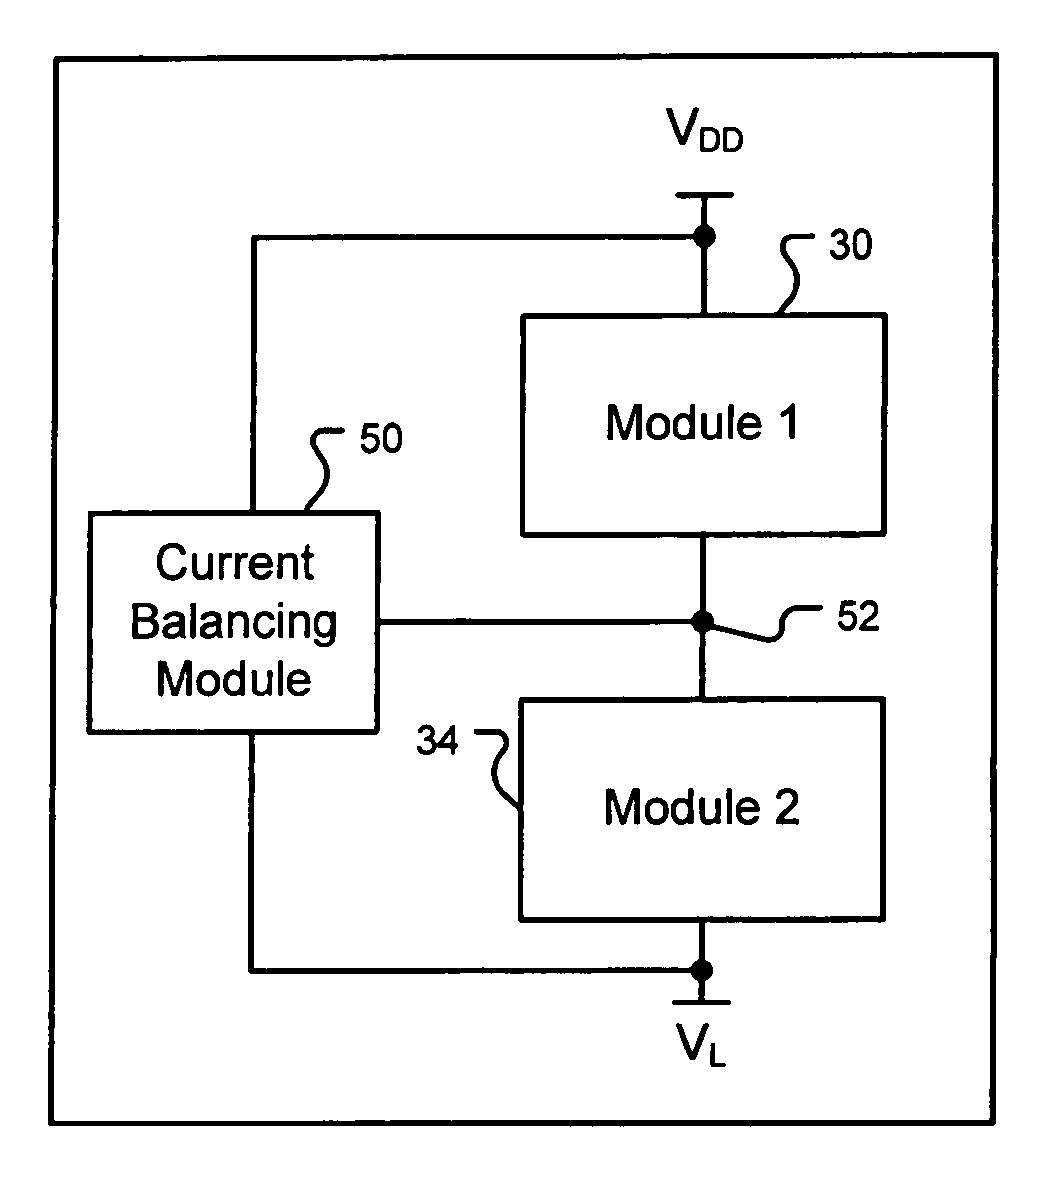 Low voltage logic operation using higher voltage supply levels